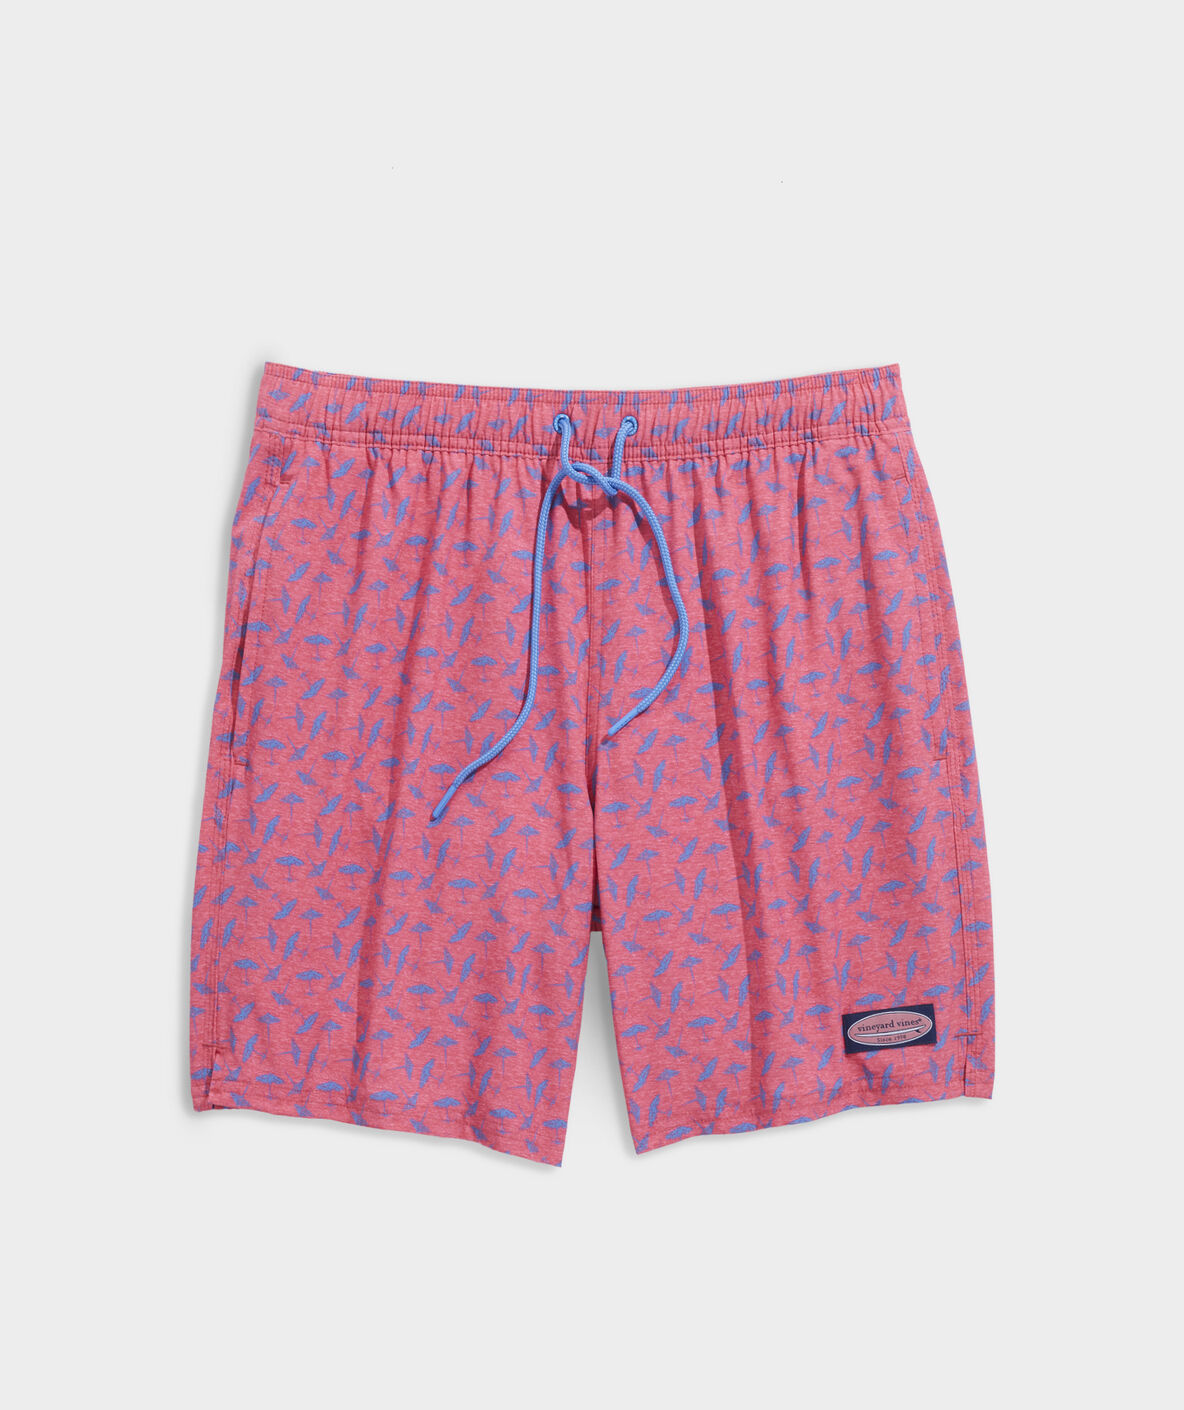 7 Inch Printed Chappy Trunks - Sailors Red